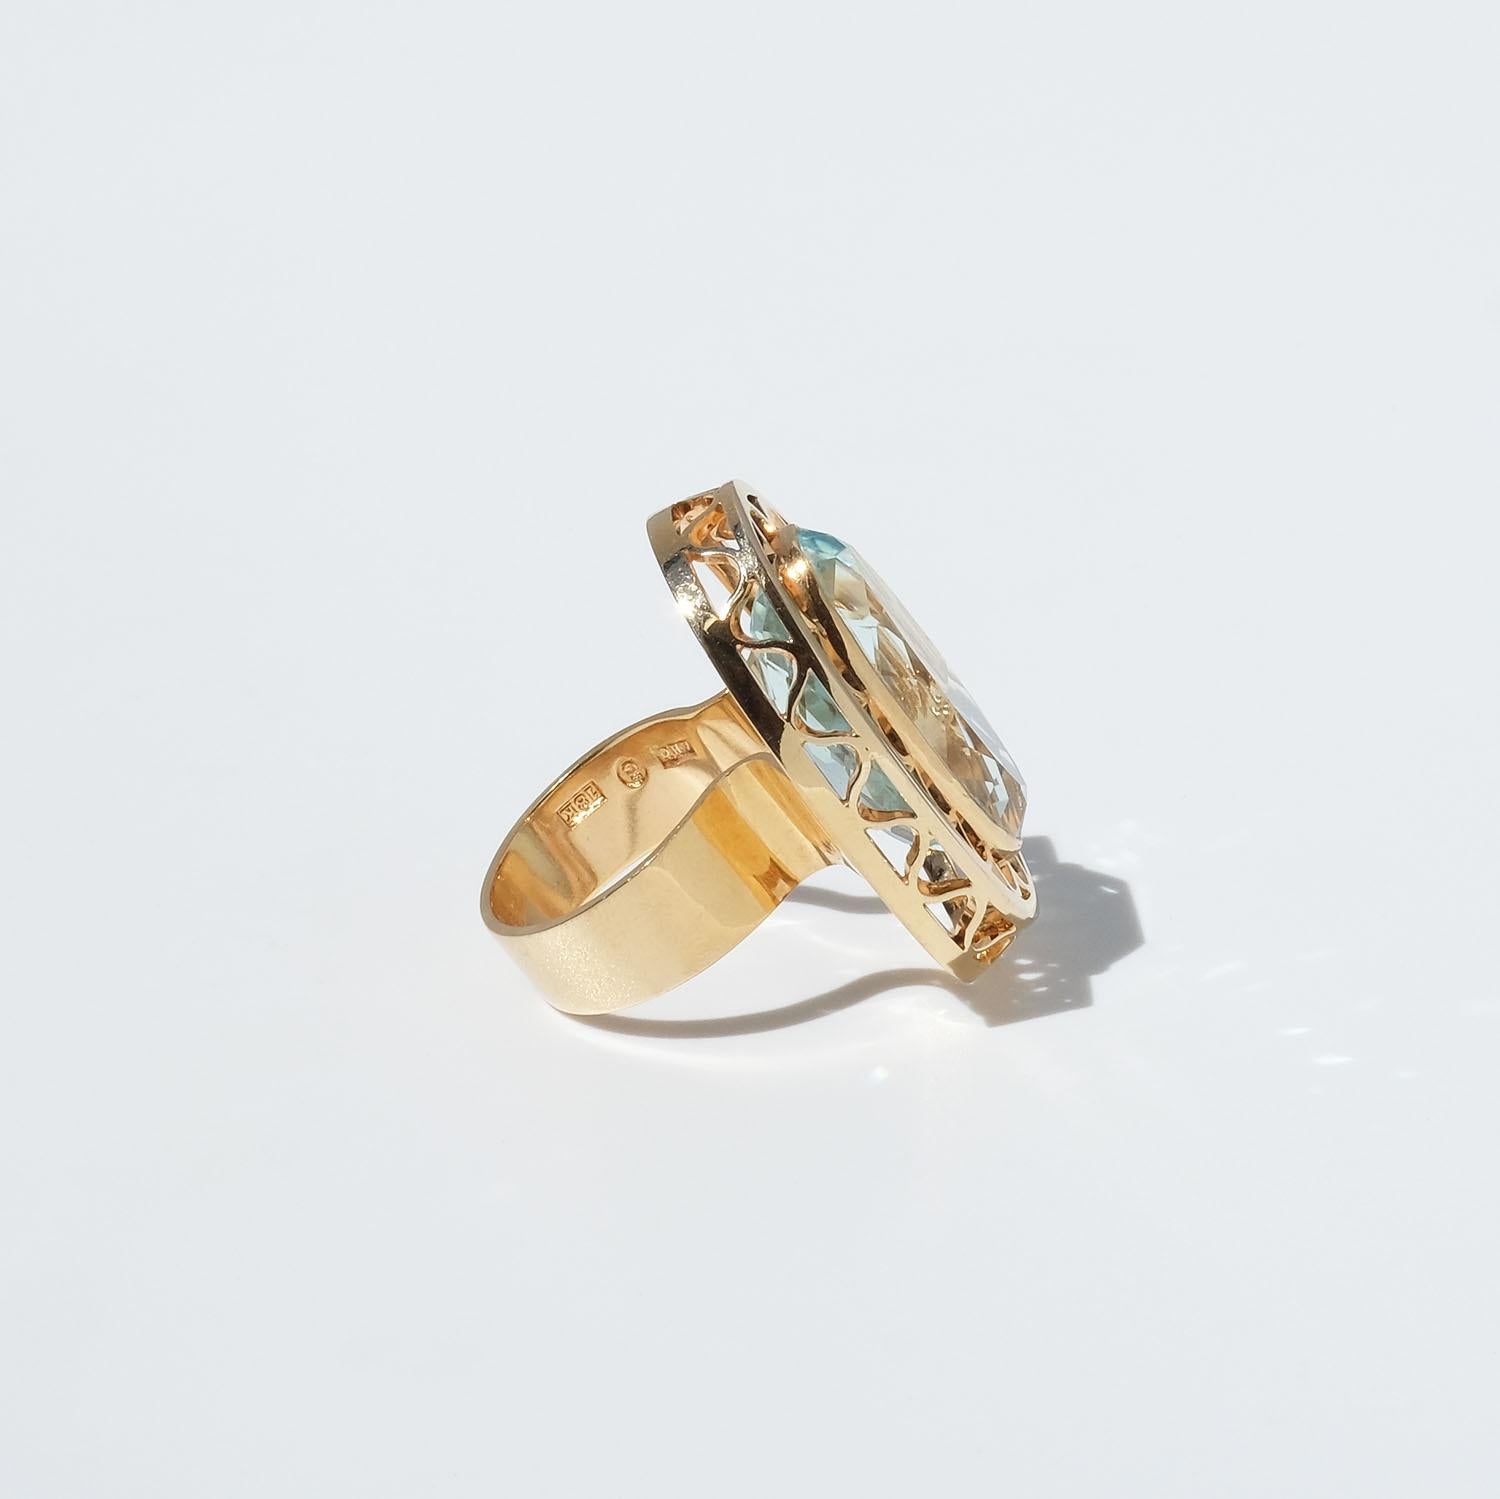 Women's Vintage 18k Gold and Aquamarine Ring by Master Anders Högberg Year, 1977 For Sale